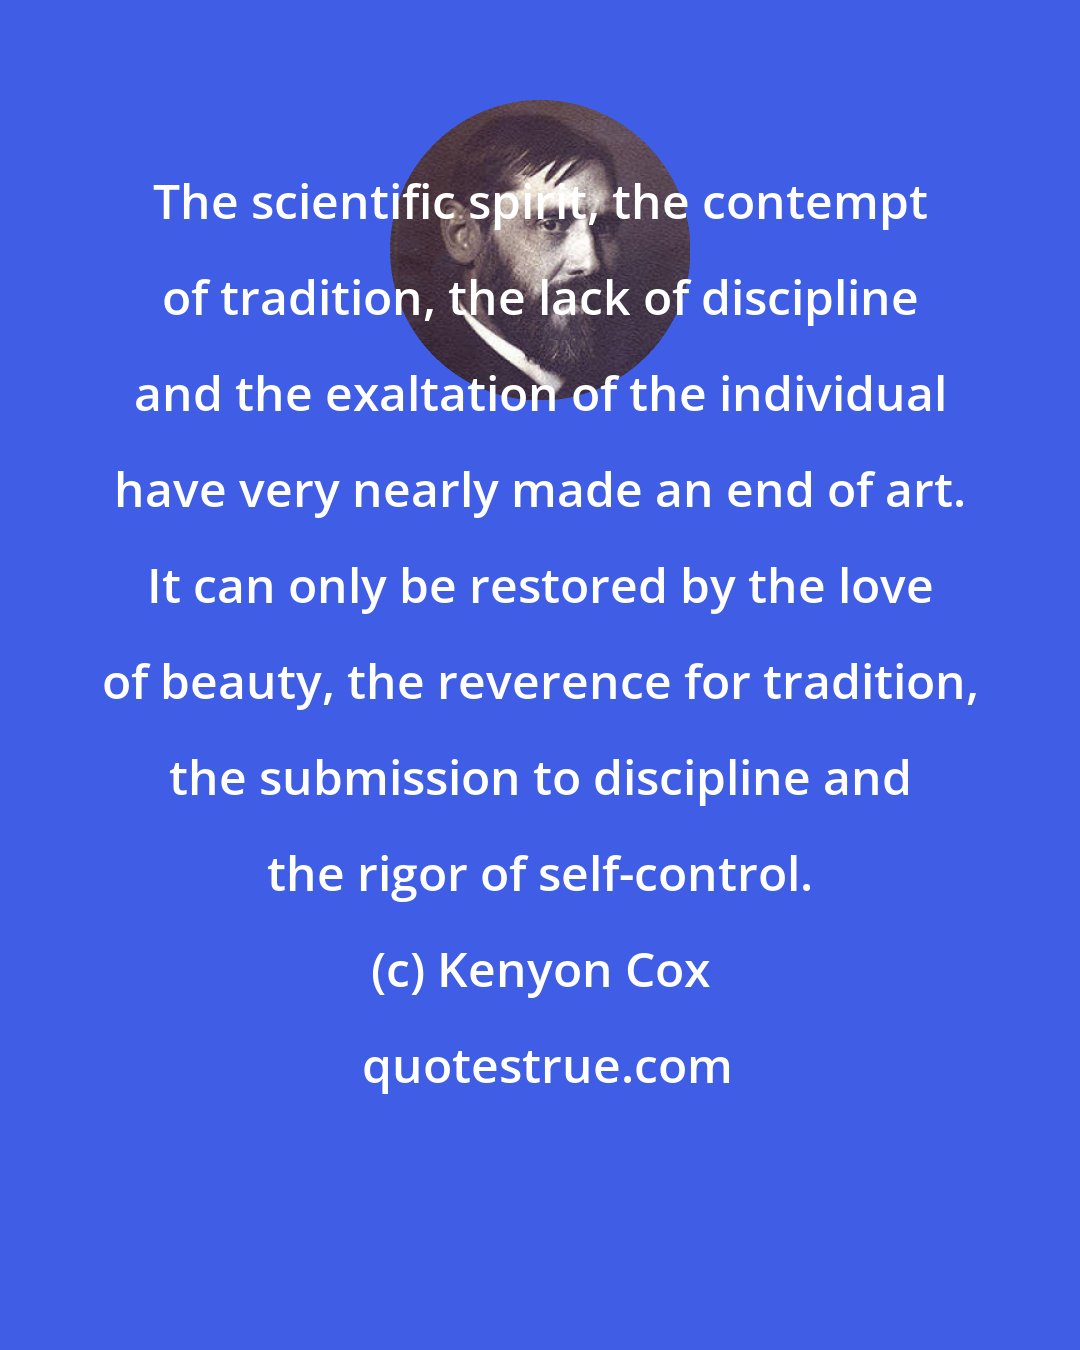 Kenyon Cox: The scientific spirit, the contempt of tradition, the lack of discipline and the exaltation of the individual have very nearly made an end of art. It can only be restored by the love of beauty, the reverence for tradition, the submission to discipline and the rigor of self-control.